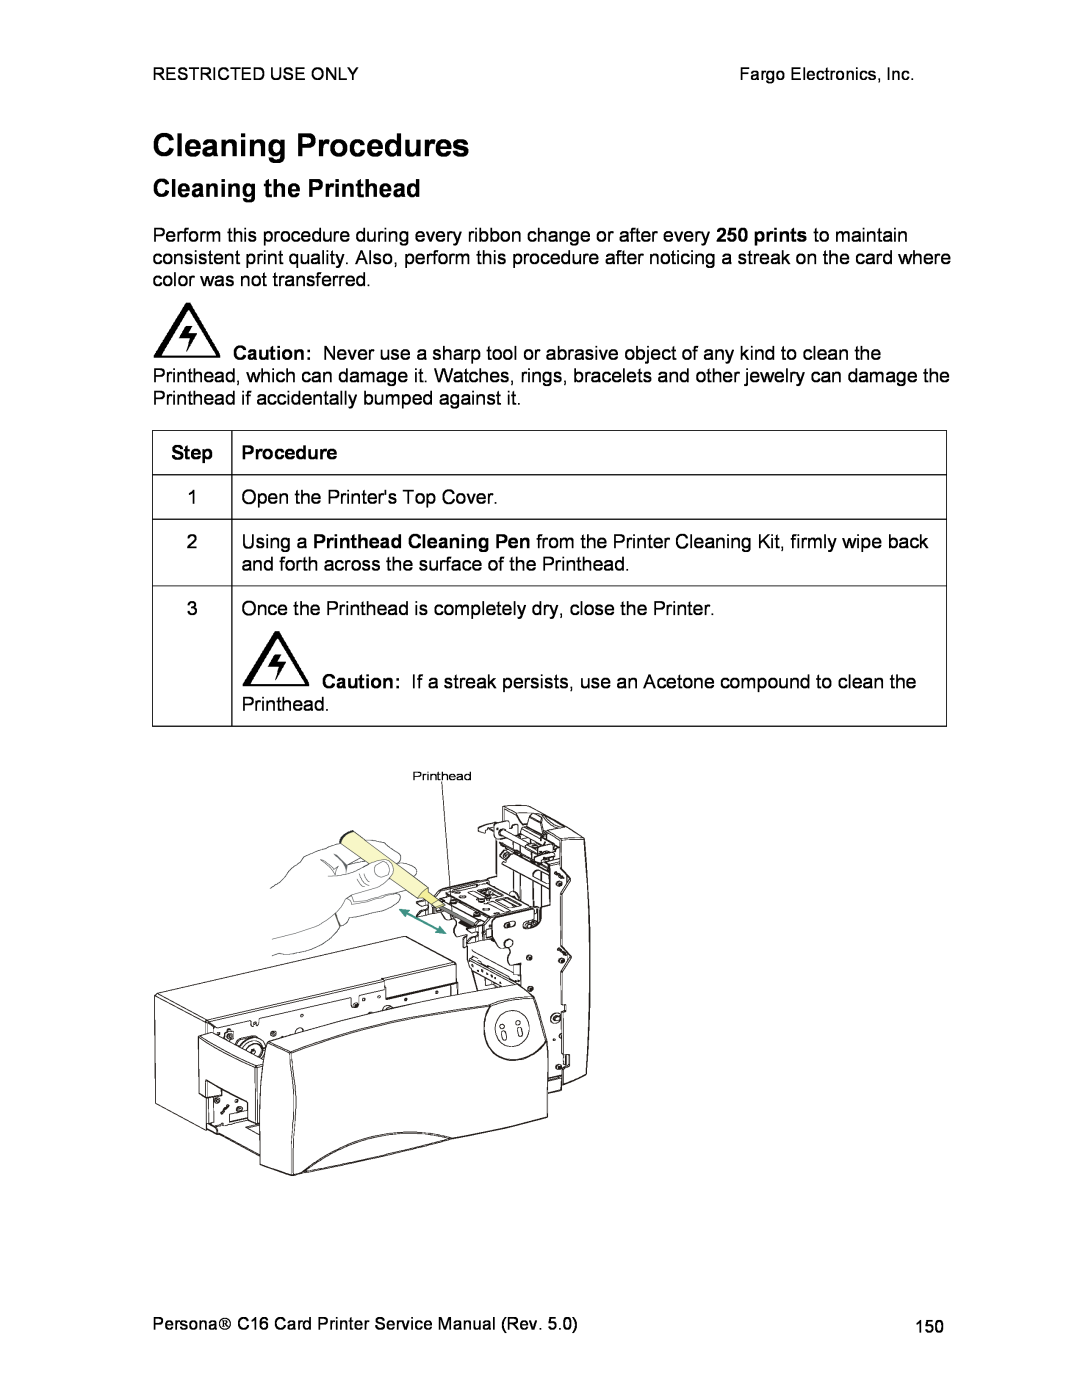 FARGO electronic C16 service manual Cleaning Procedures, Cleaning the Printhead 